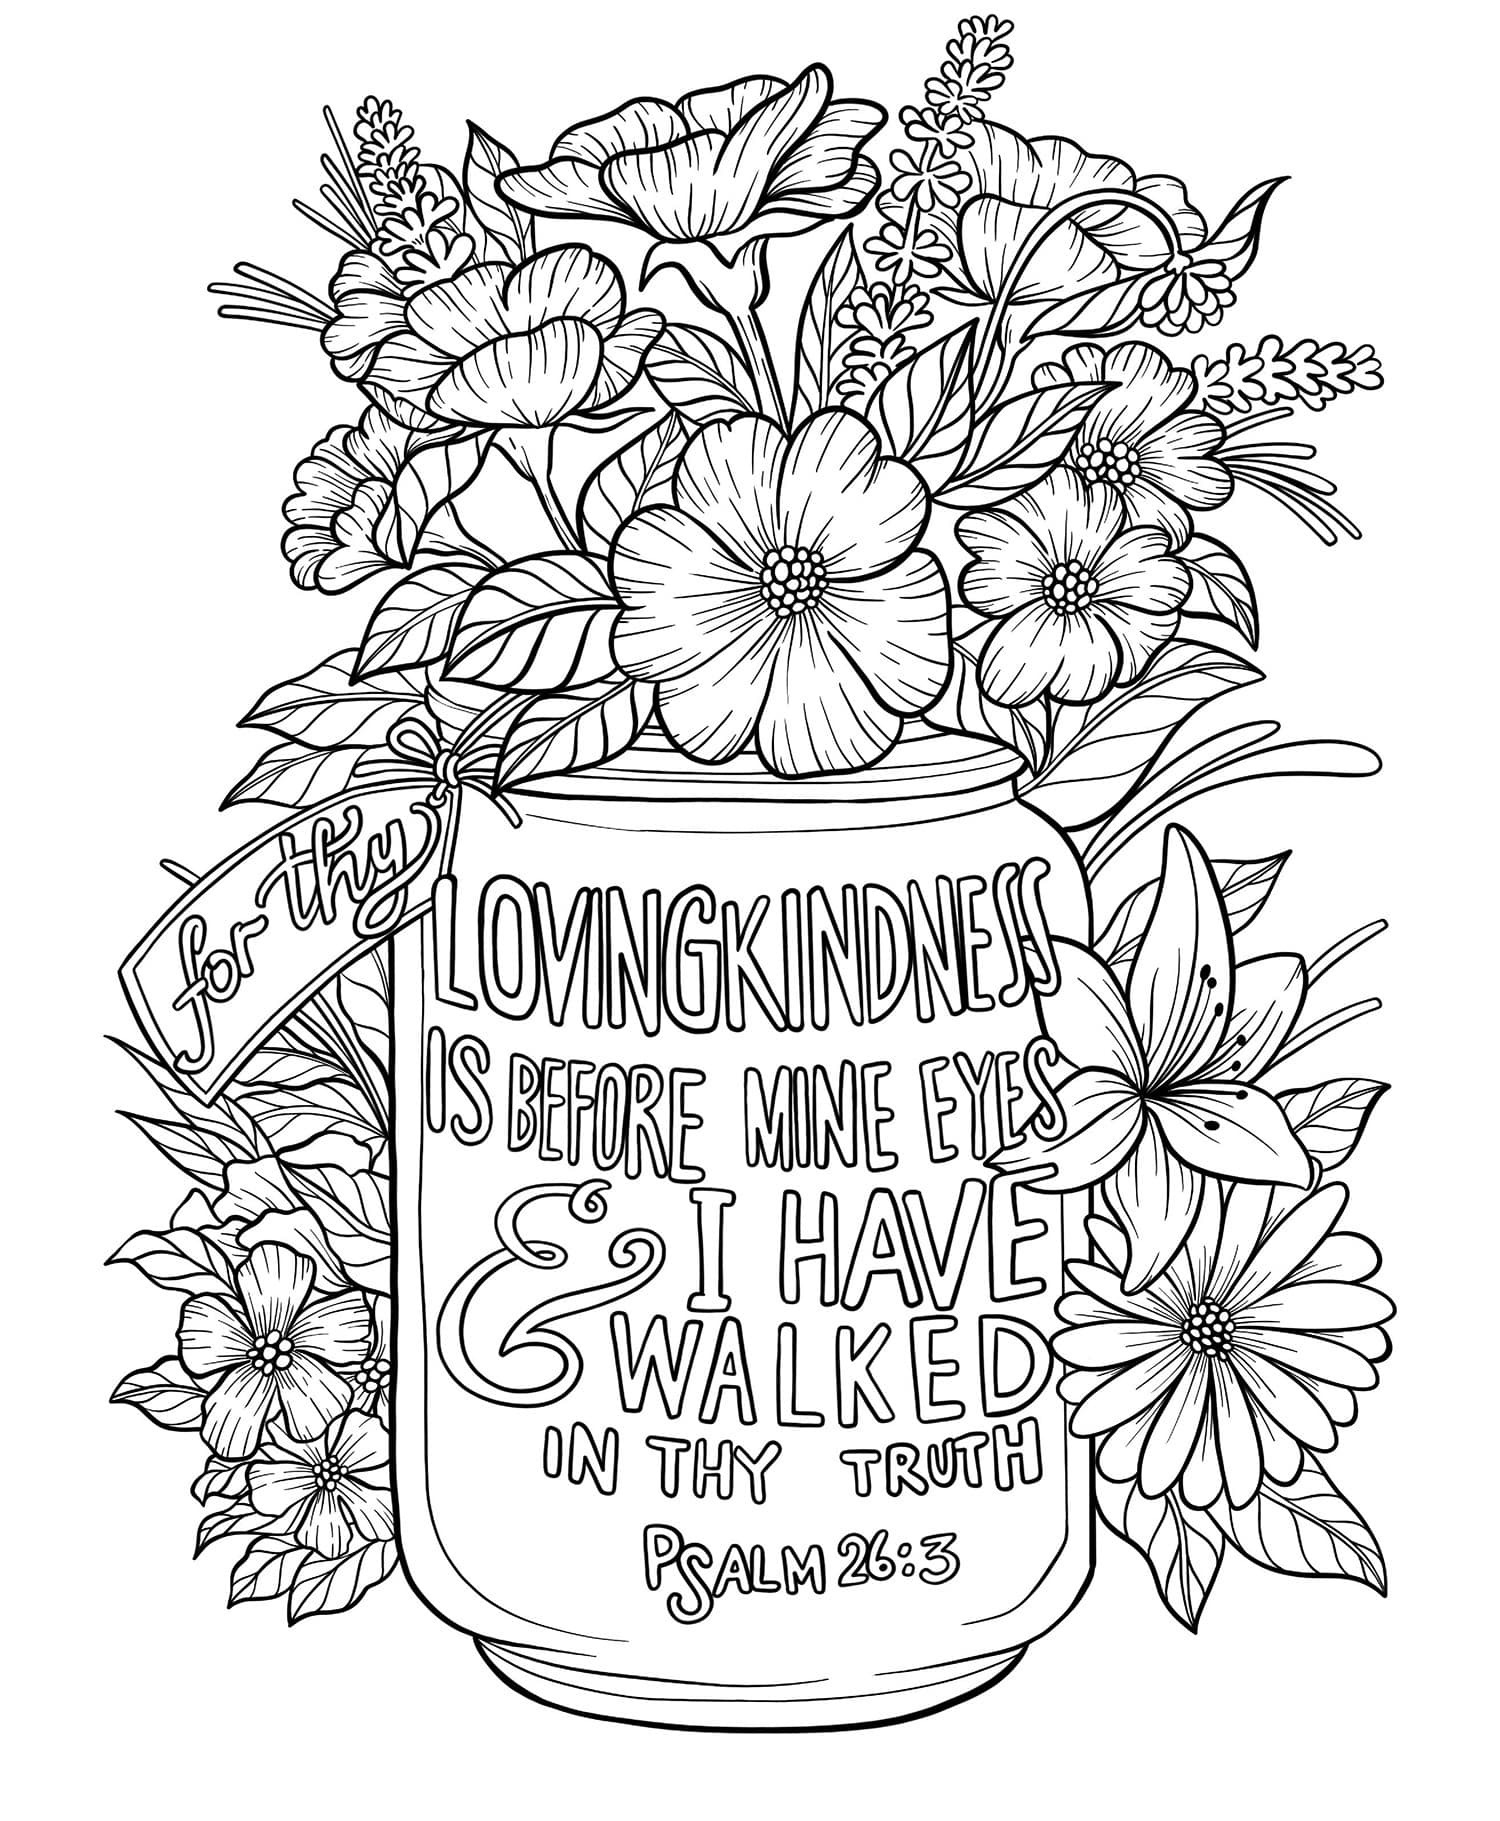 20 Adult Coloring Pages That Are Printable and Fun   Happier Human